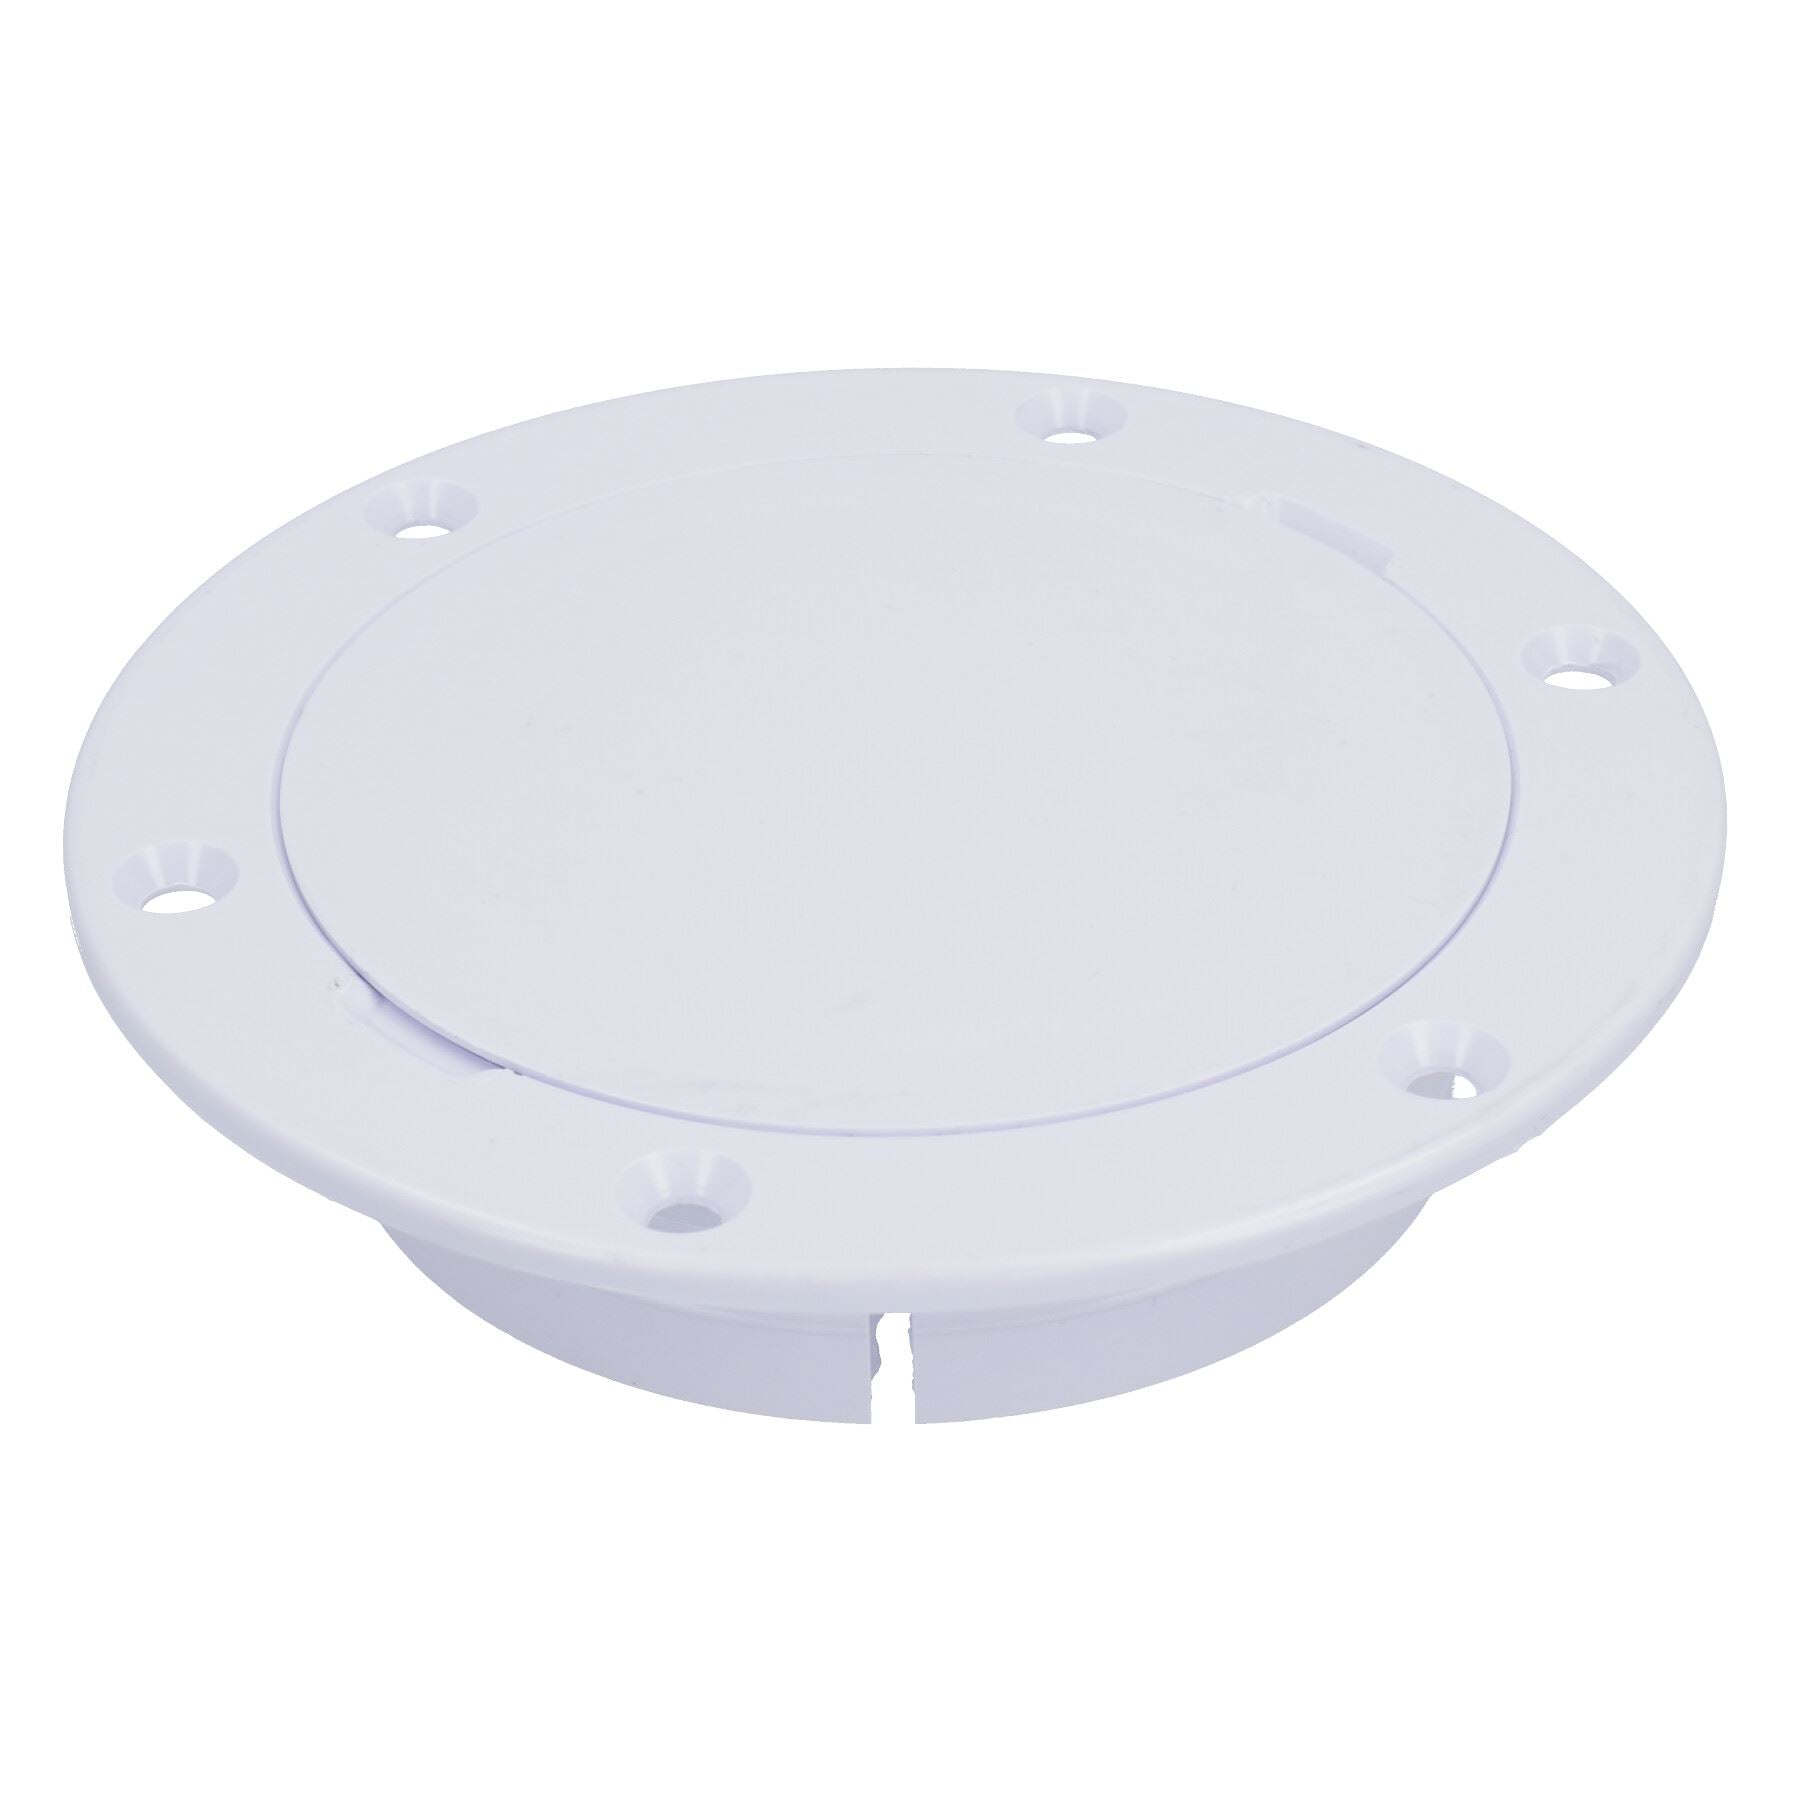 3" Snap in Flat Deck Plate by Marinco Round Inspection Hatch Waterproof Cover